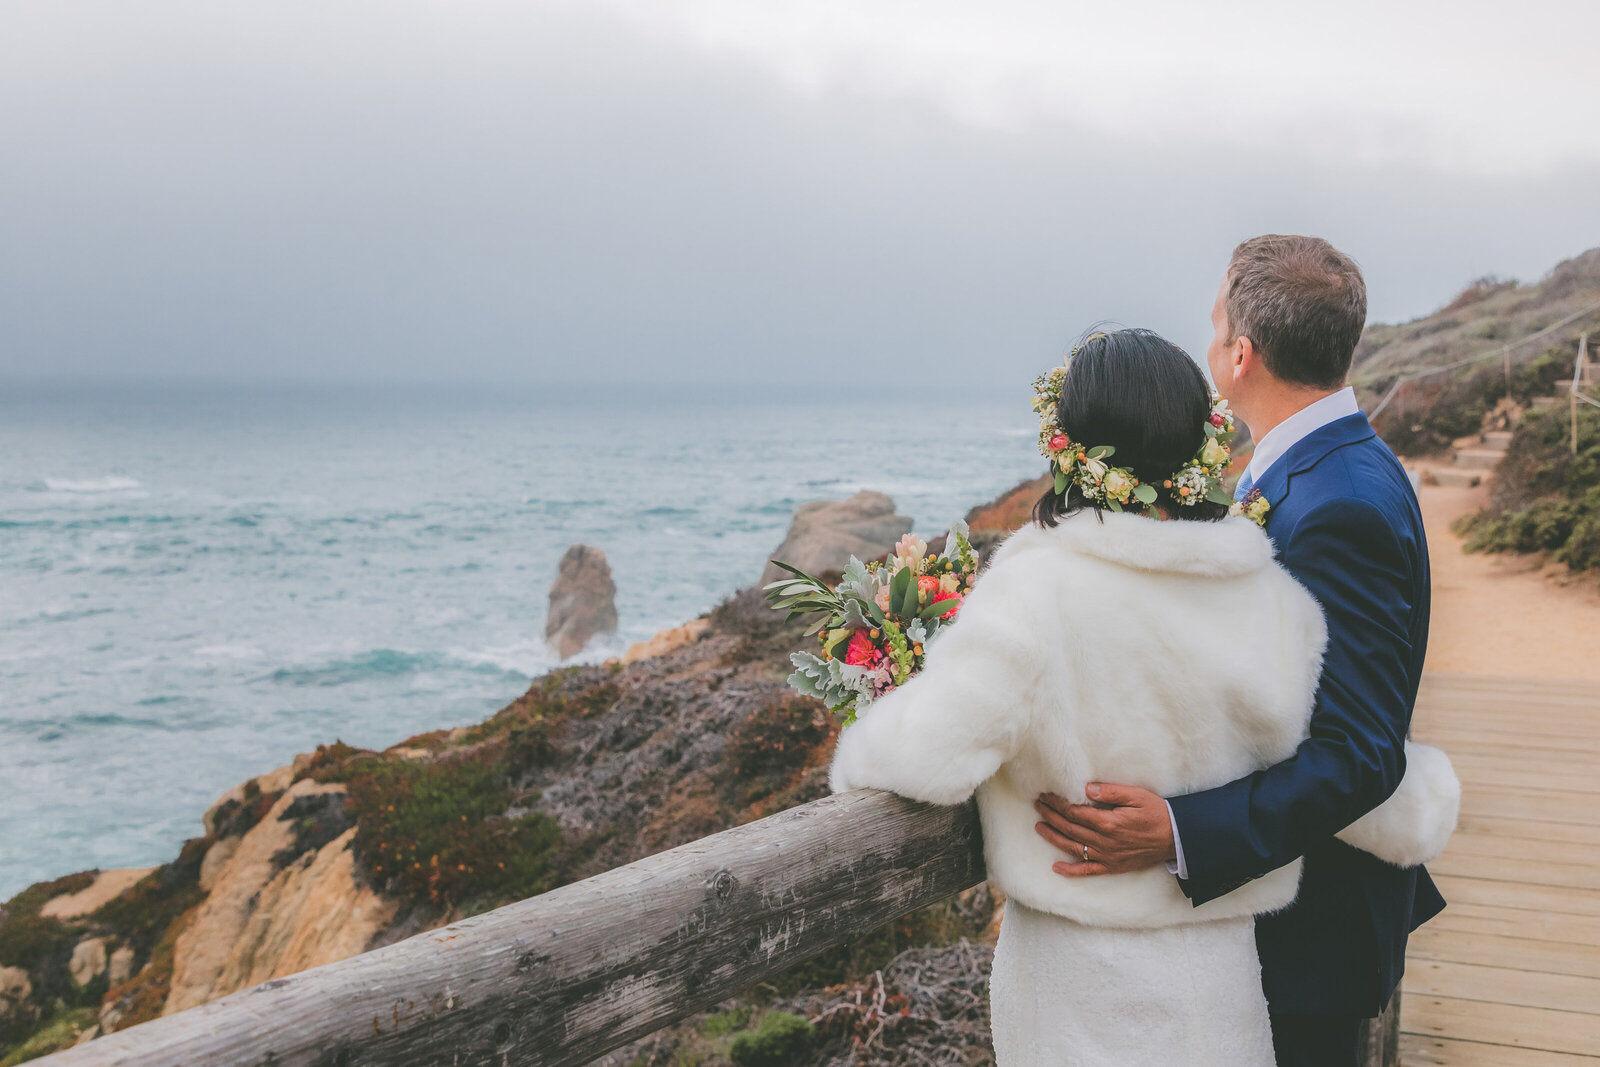 You can see the backs of a bride and groom as they hug each other and stare into the ocean view in Big Sur.